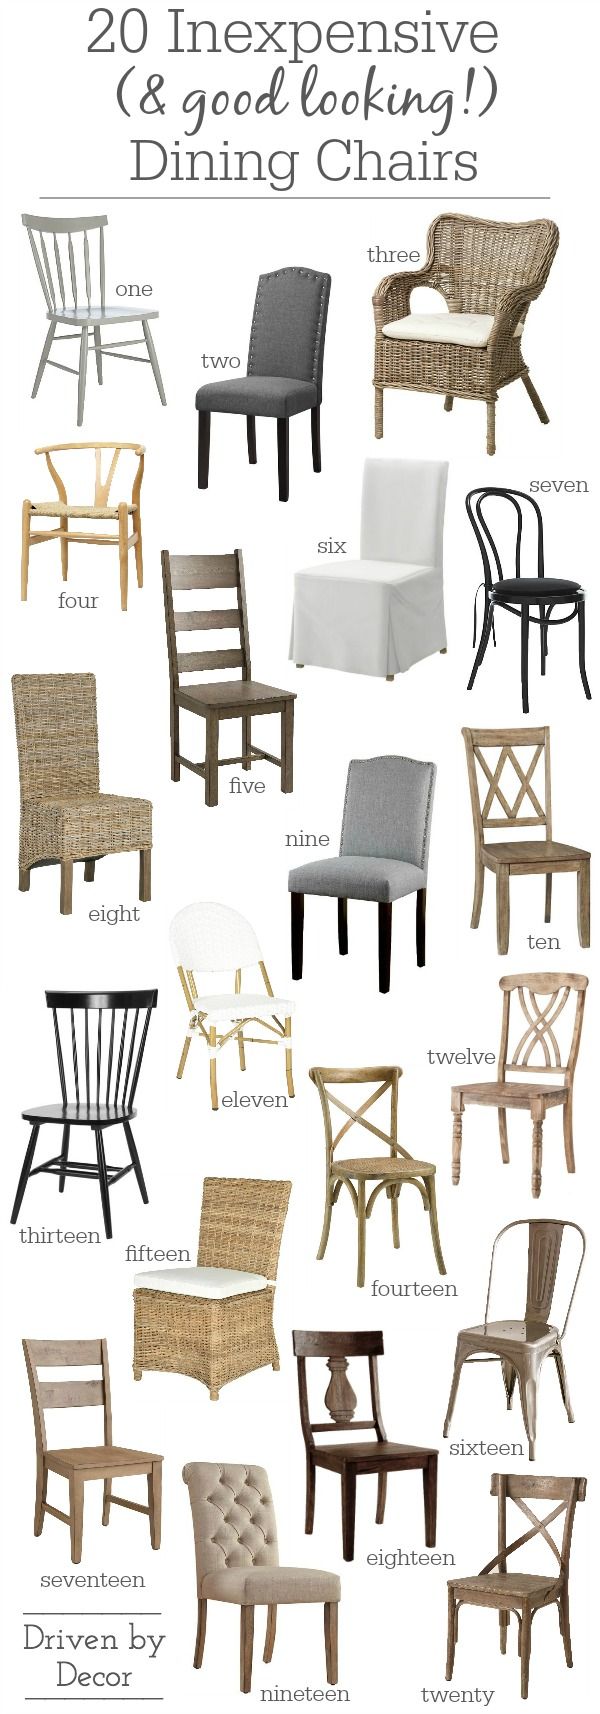 15 Inexpensive Dining Chairs (That Don't Look Cheap!)